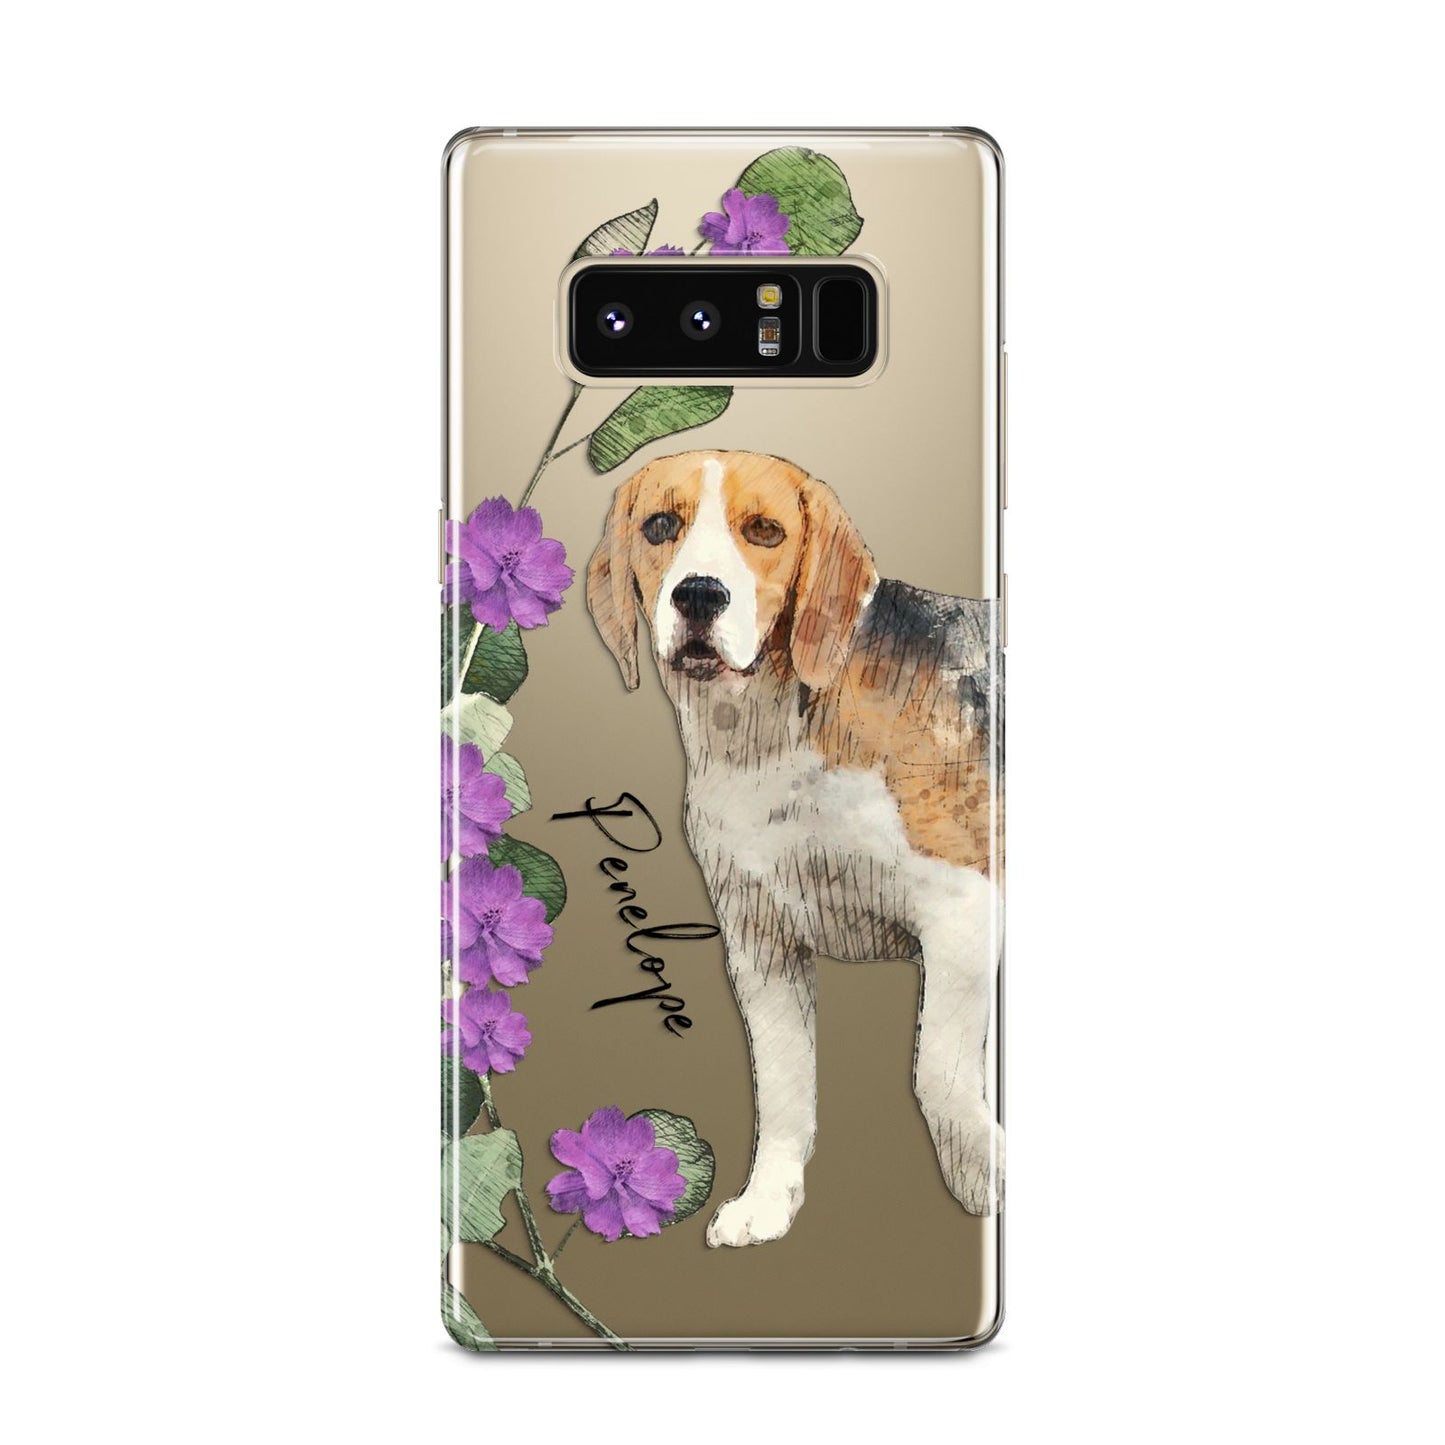 Personalised Dog Samsung Galaxy Note 8 Case